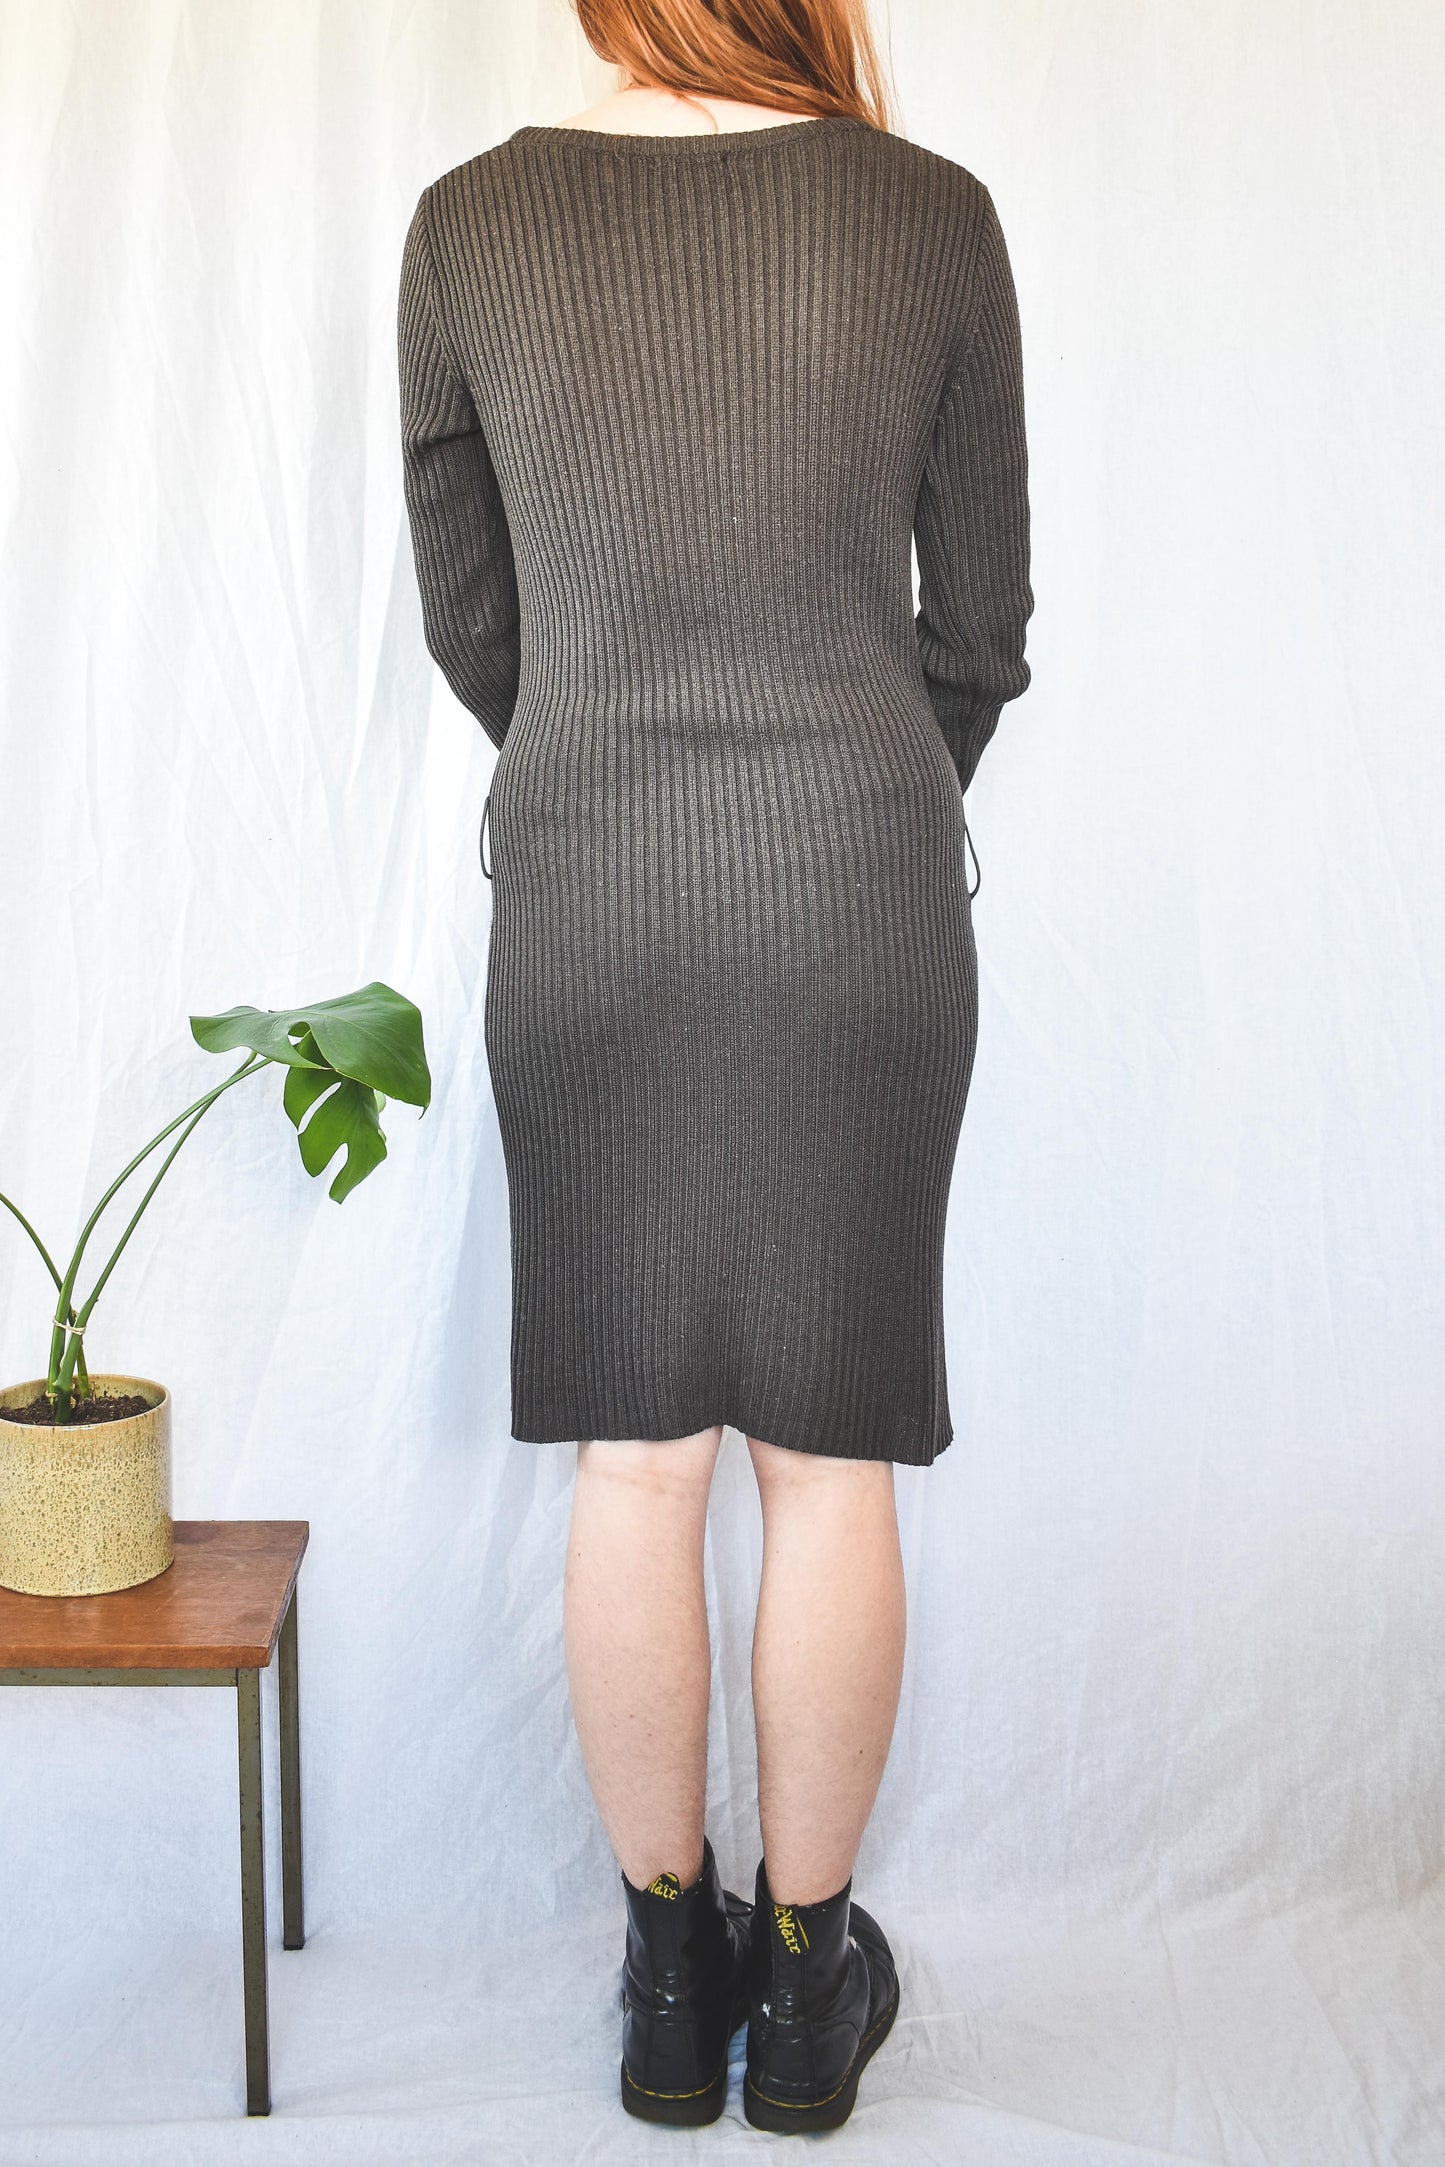 NEW IN! Brown dress